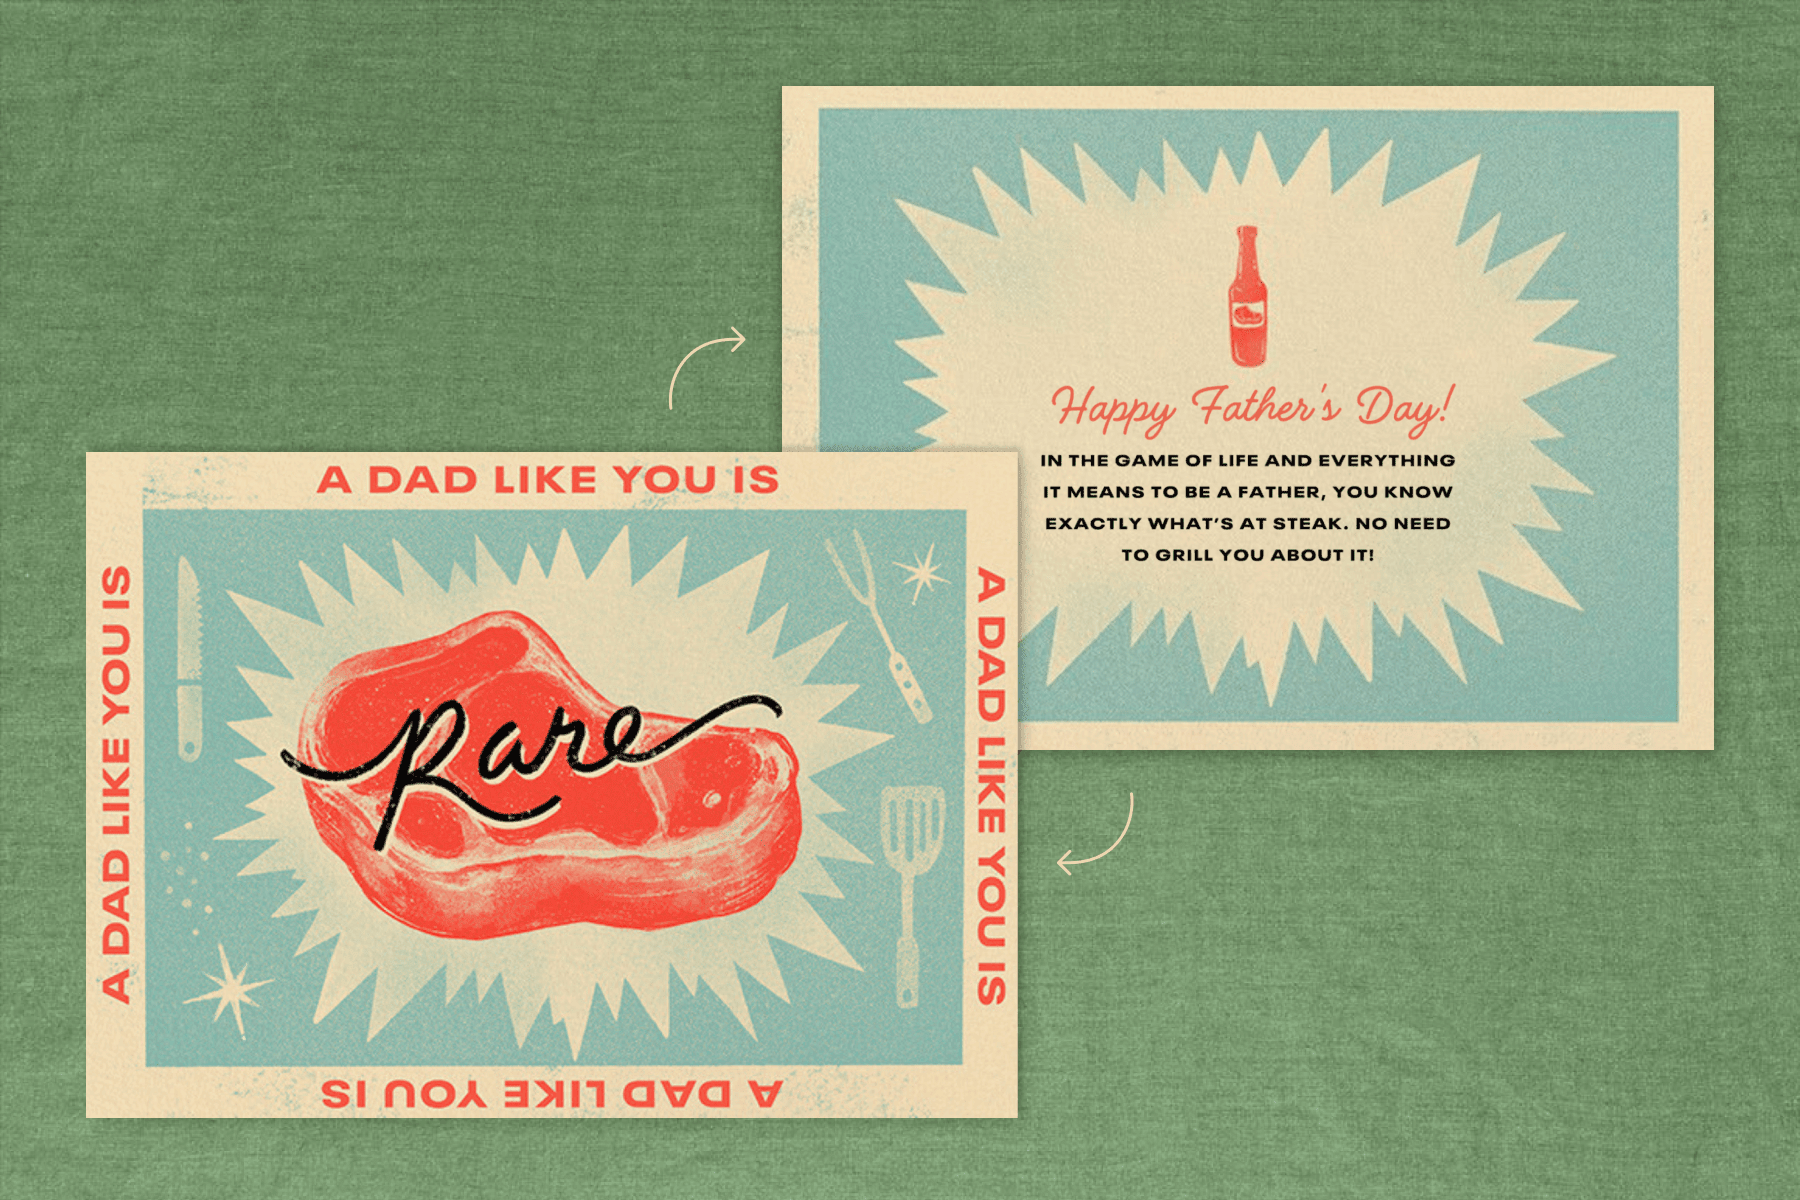 A Father’s Day card featuring an illustration of a raw steak with the words “A dad like you is rare” on repeat. The back of the card is also shown with a sample message also listed in the suggestions below.